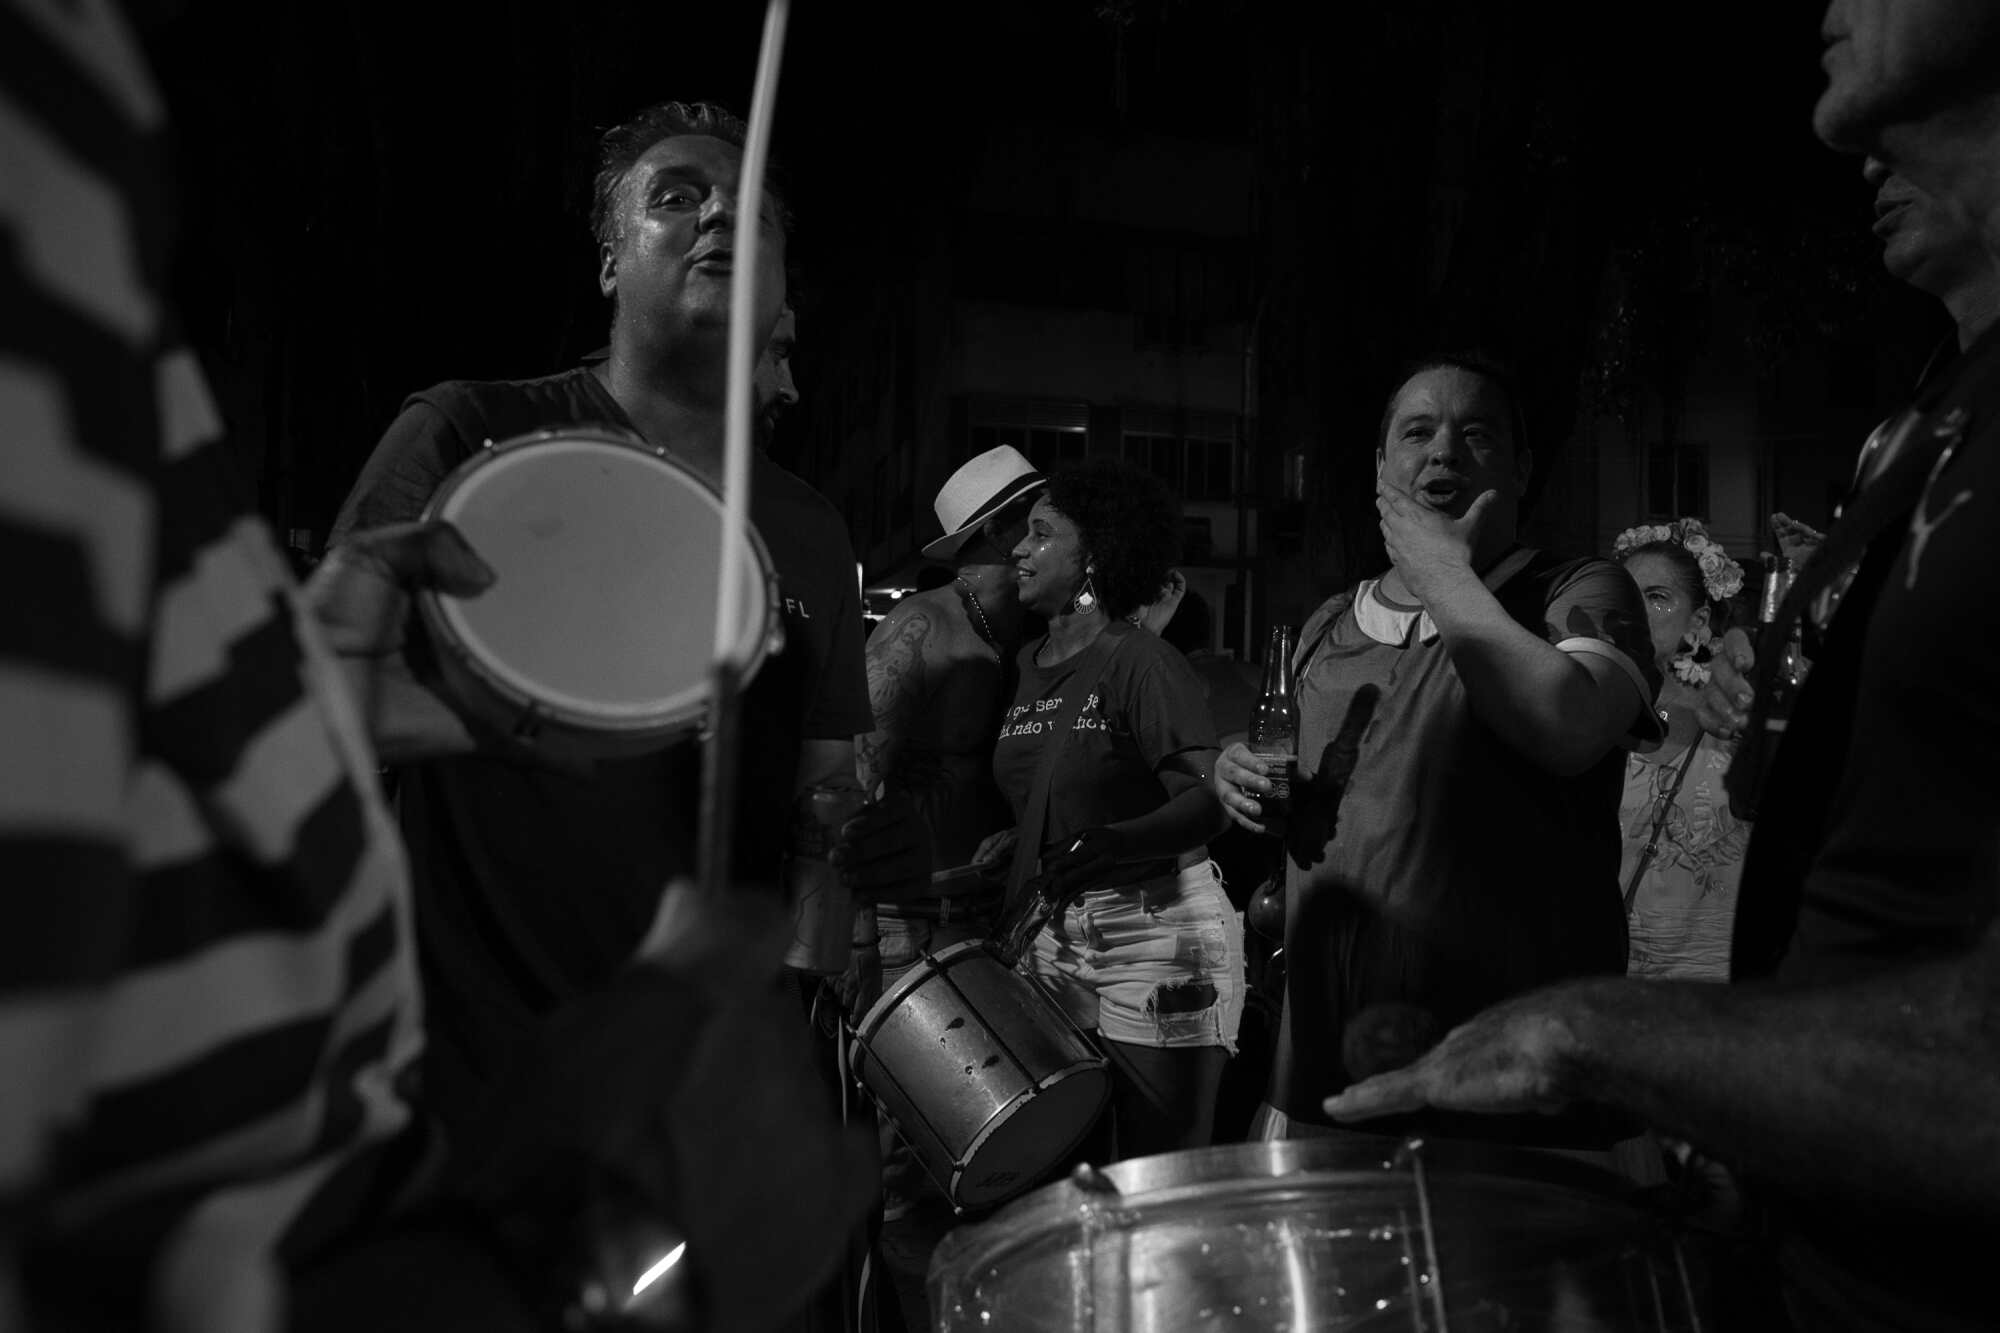 People singing and playing instruments during carnaval in Rio de Janeiro in a black & white photo.